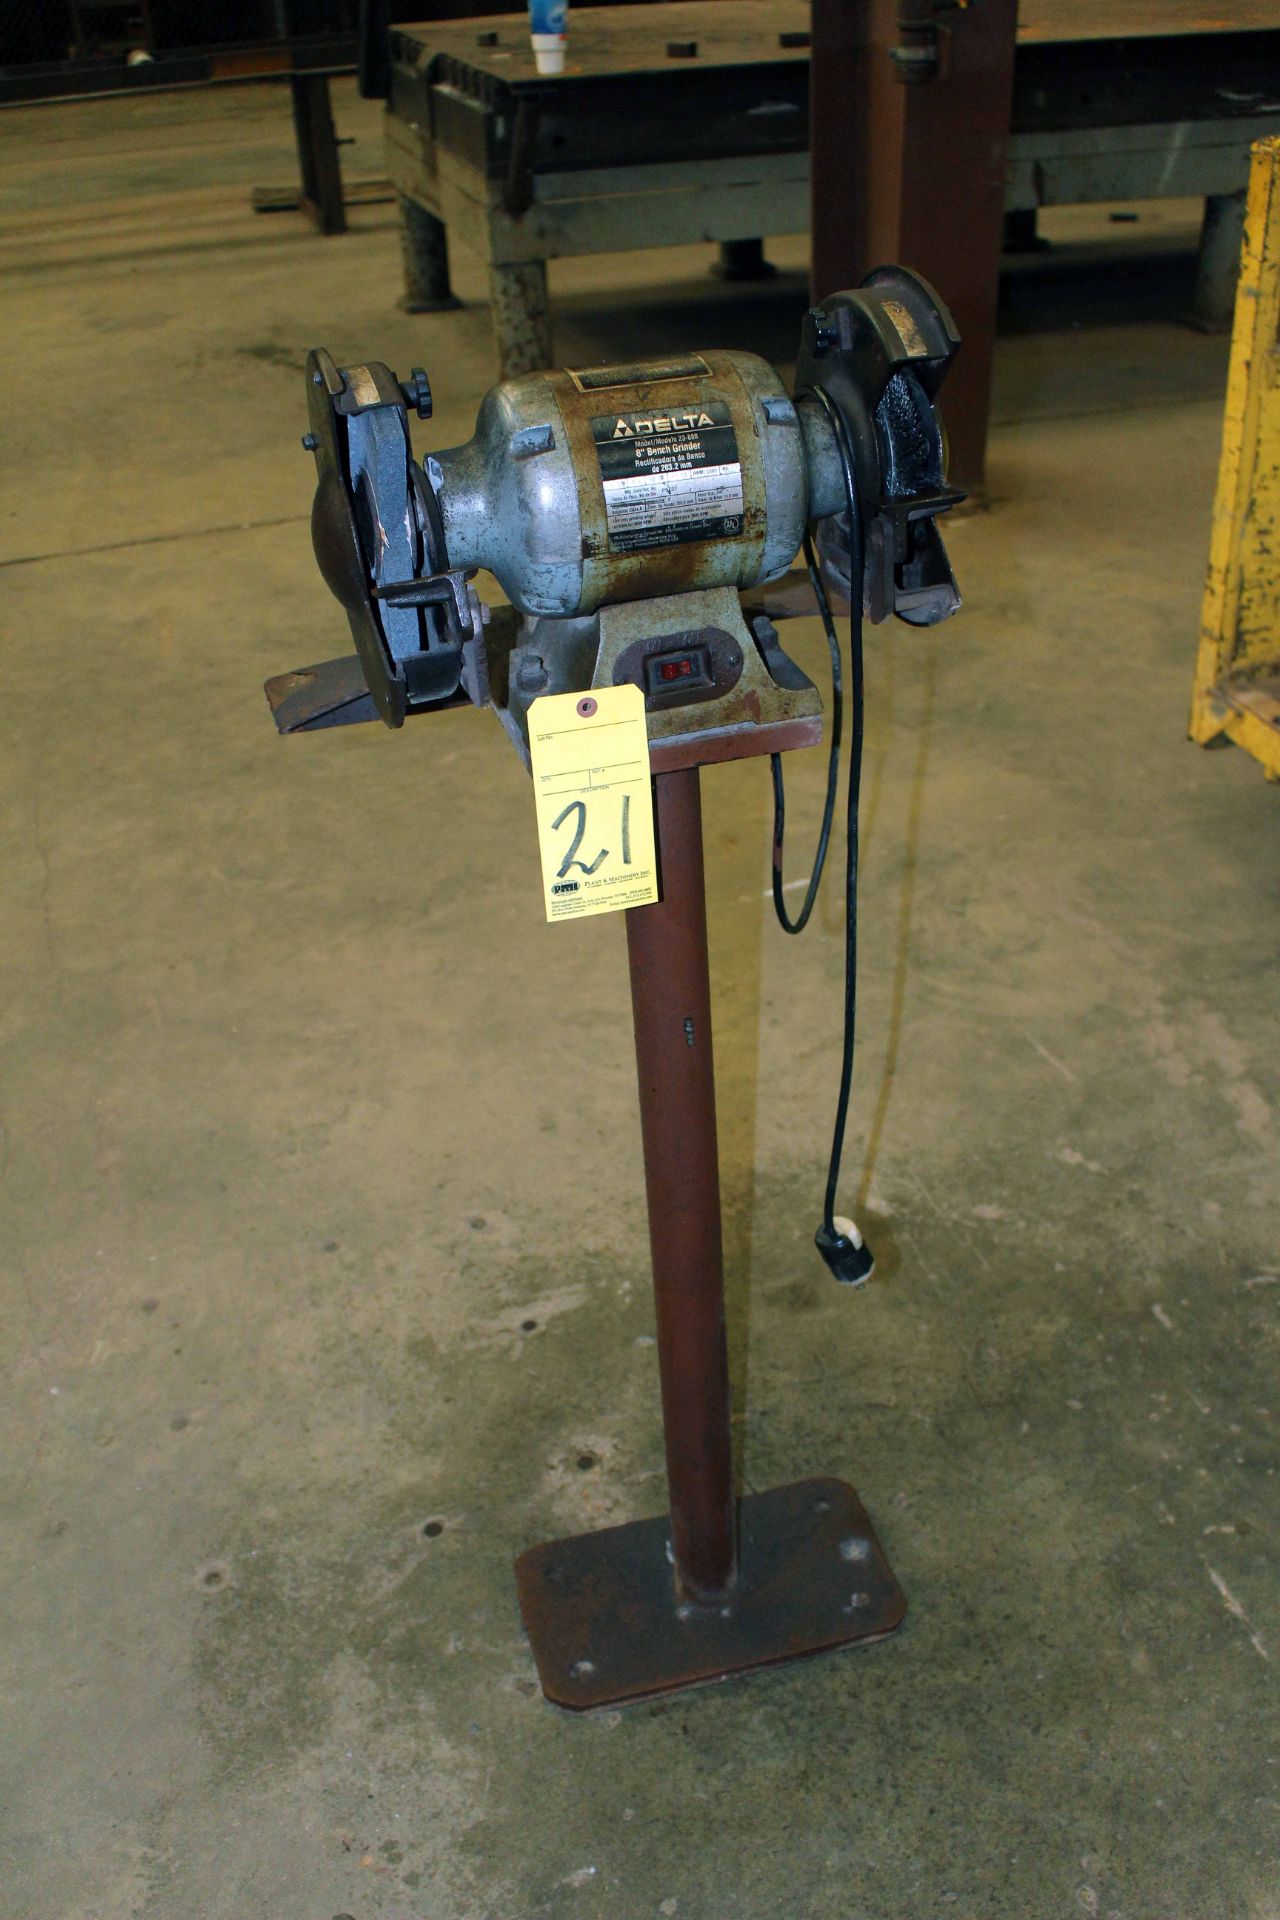 BENCH GRINDER, DELTA MDL. 23-880, 1/2 HP motor, fabricated steel stand